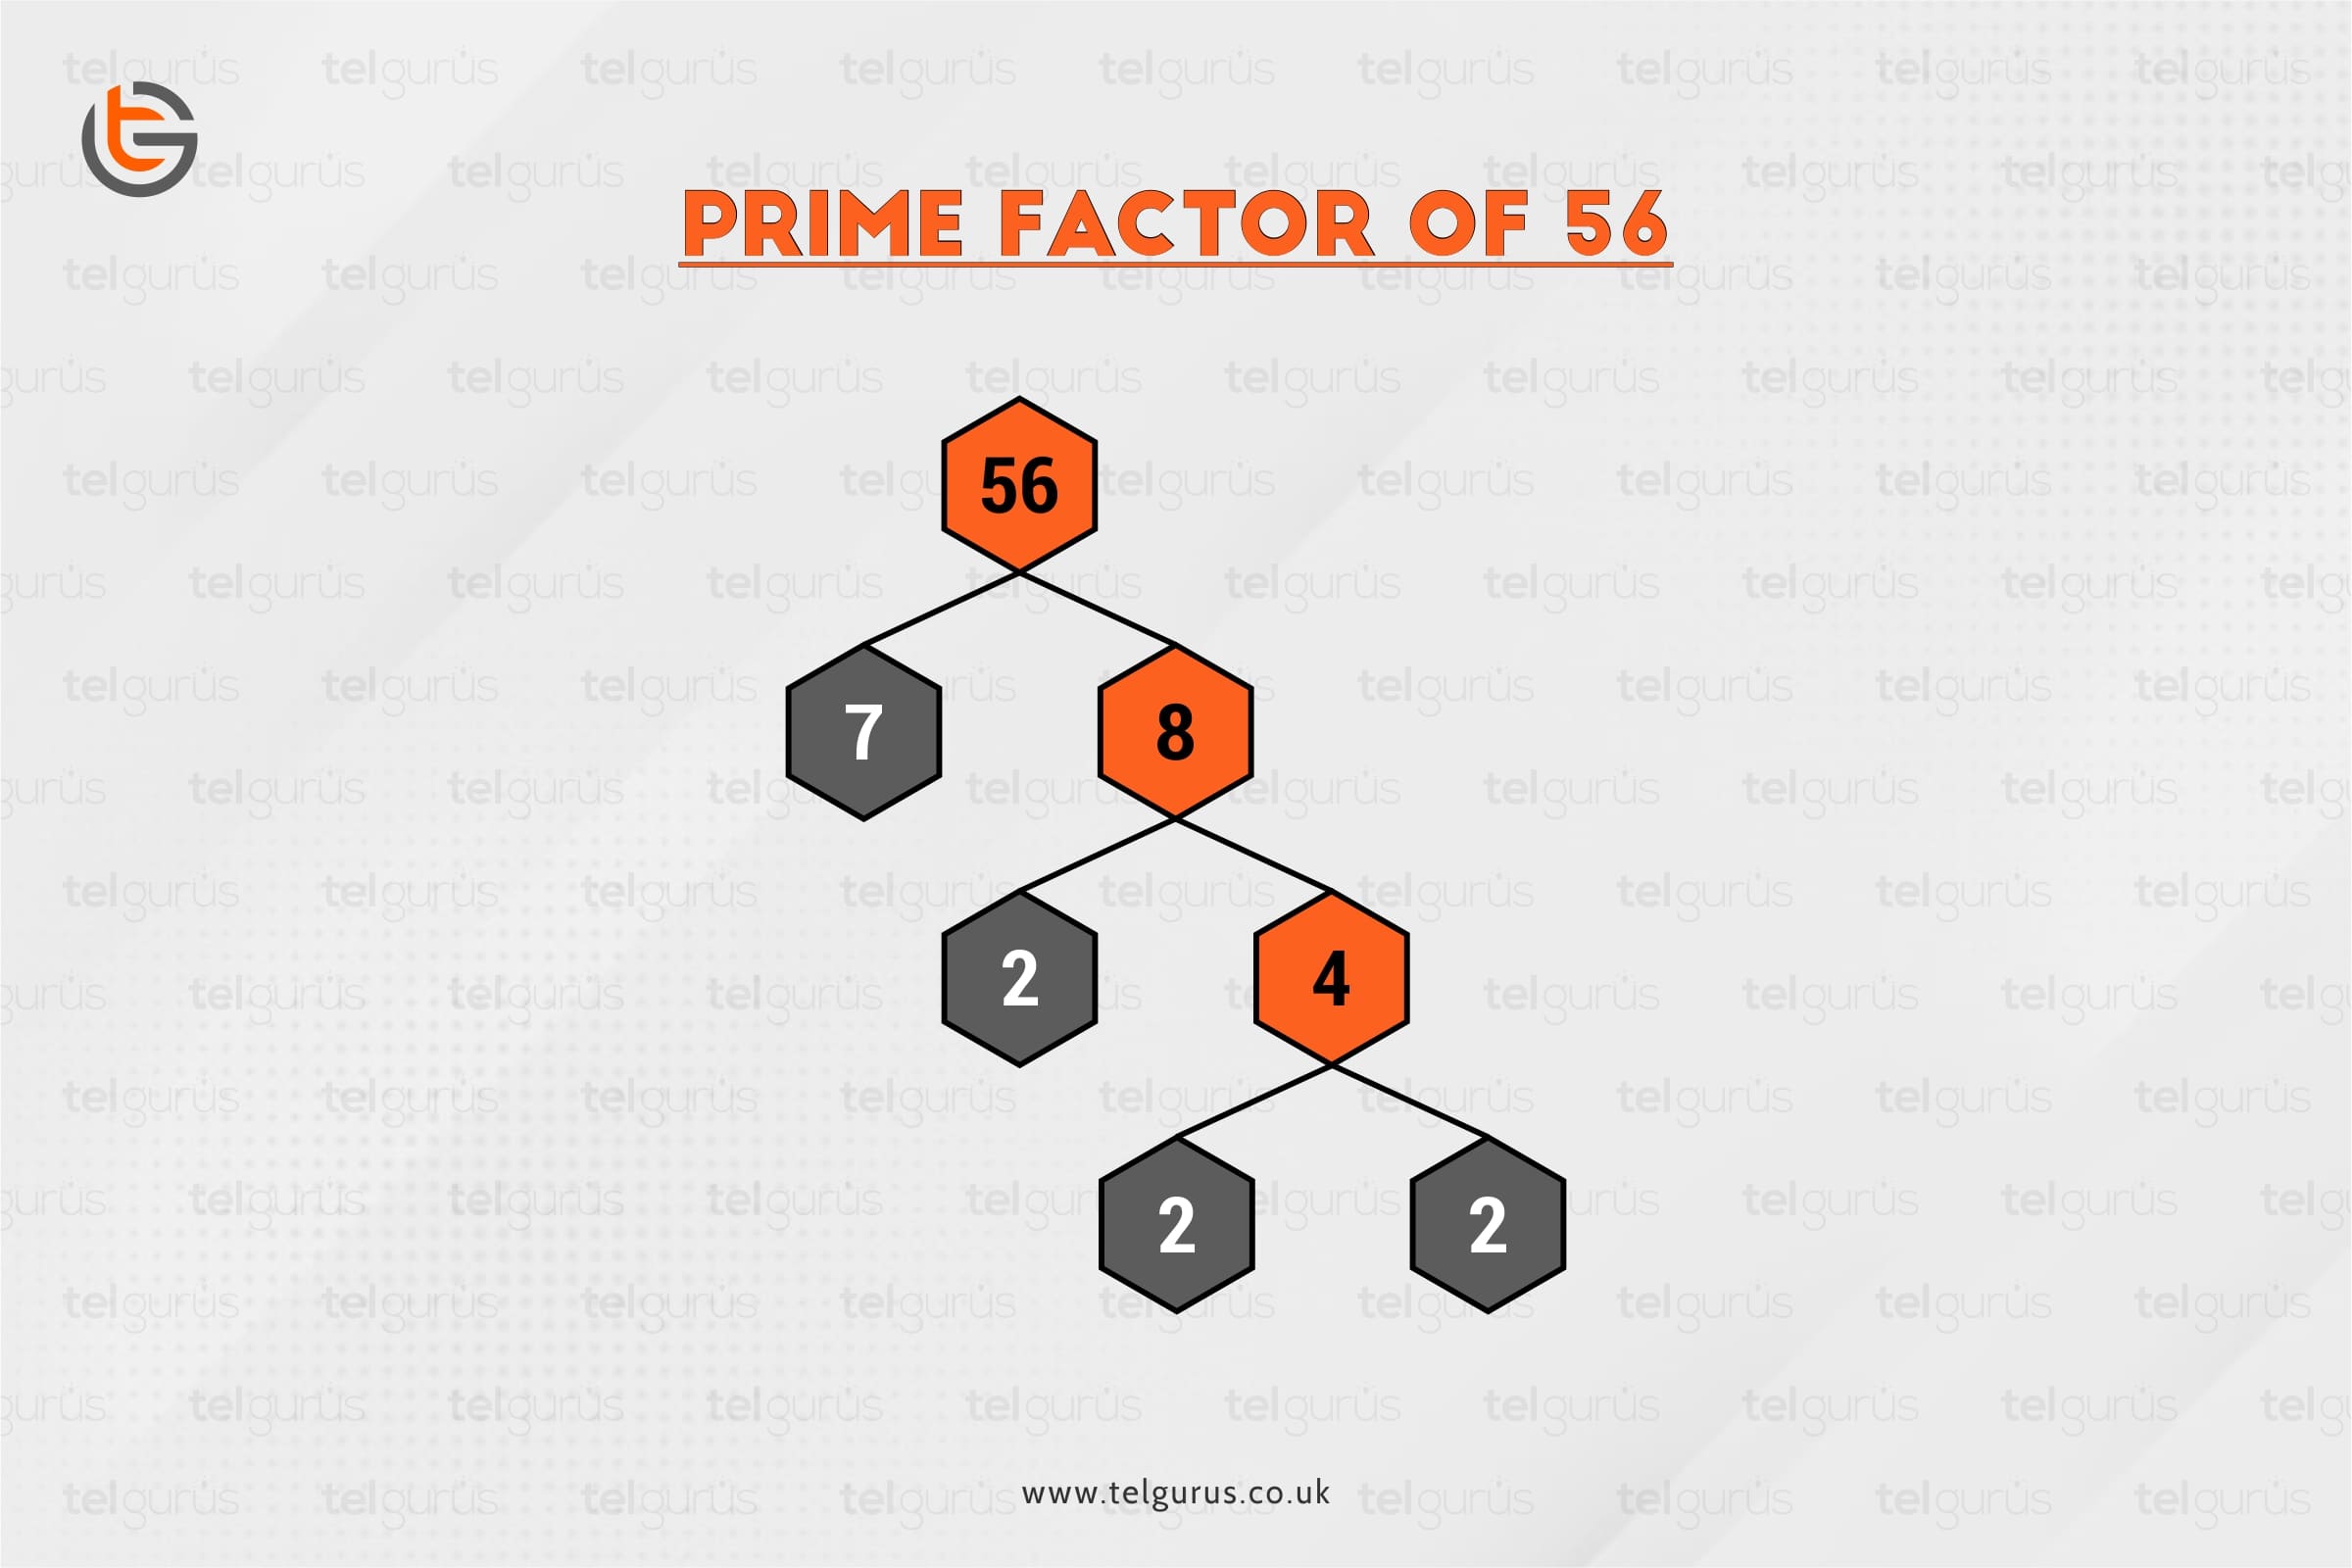 Express 56 as the product of its prime factors?